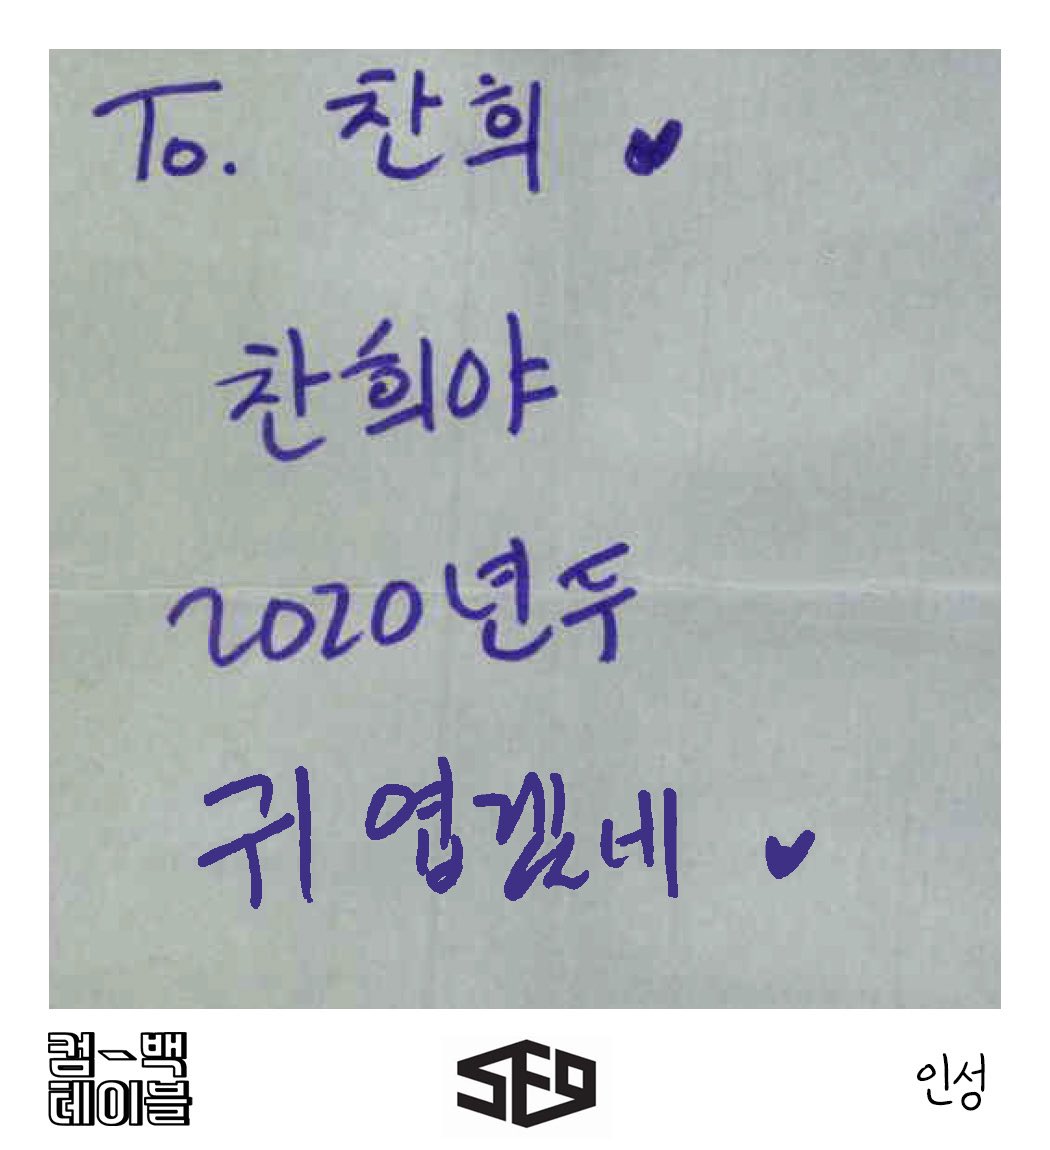 (ENG) MPD Comeback Table - Time Capsule Messages  #INSEONG  #SF9 : To. ChaniChani-yah, you’ll probably be cute in 2020 too 